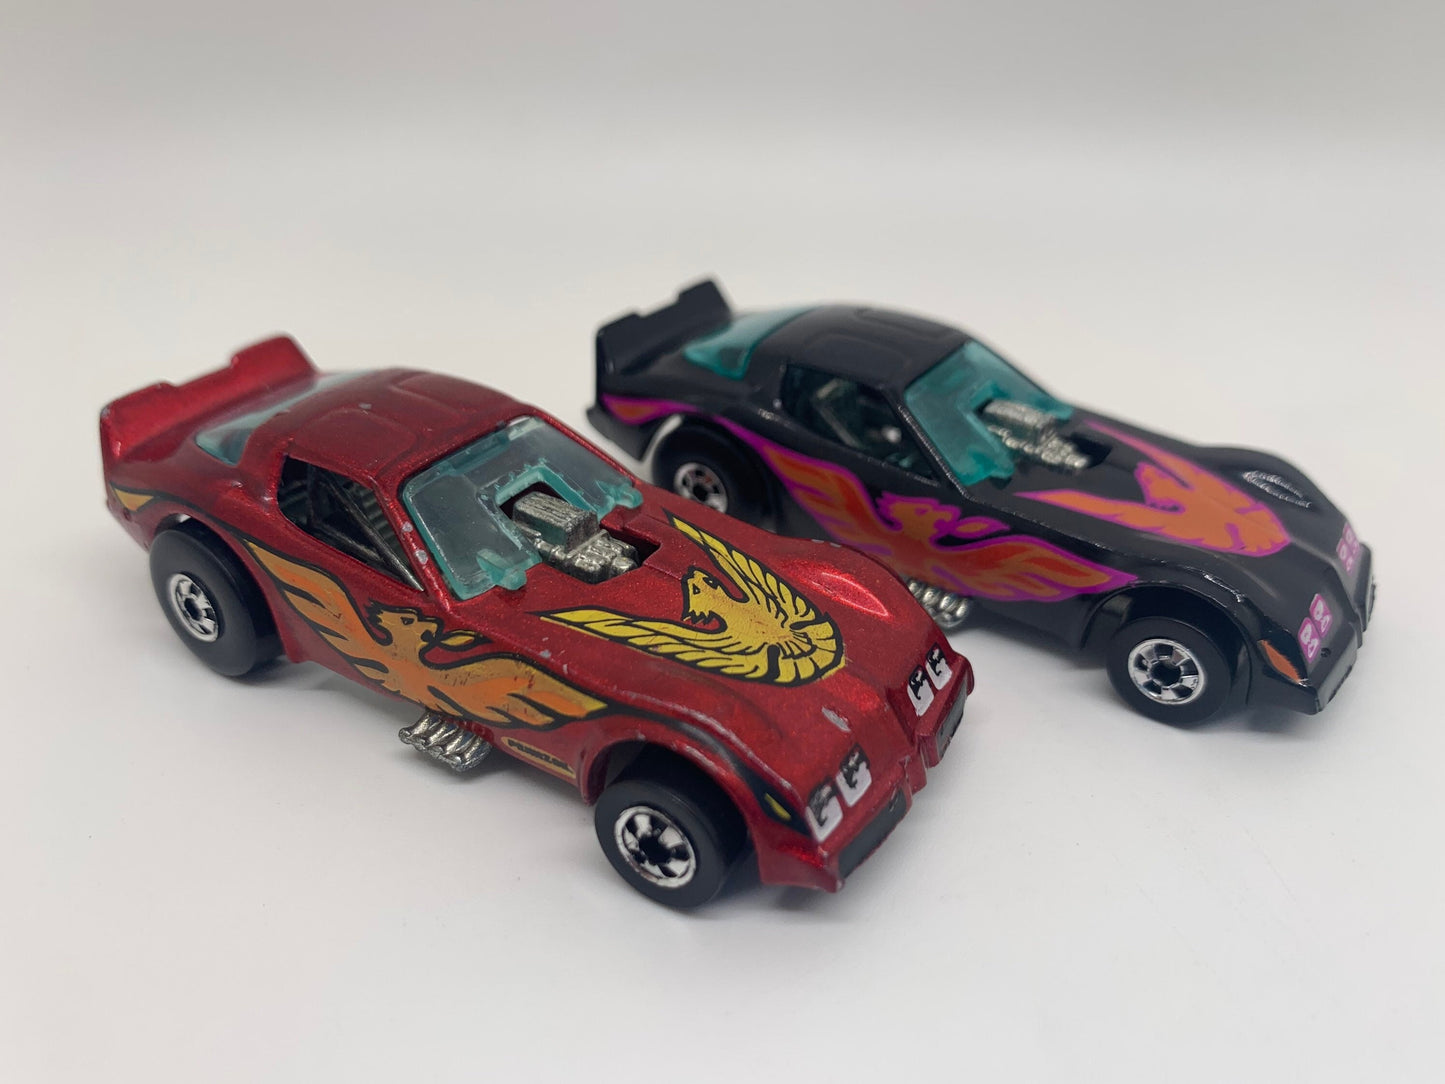 Hot Wheels Firebird Funny Car Red Mainline Black Kelloggs Perfect Birthday Gift Collectible Diecast 164 Scale Model Toy Car